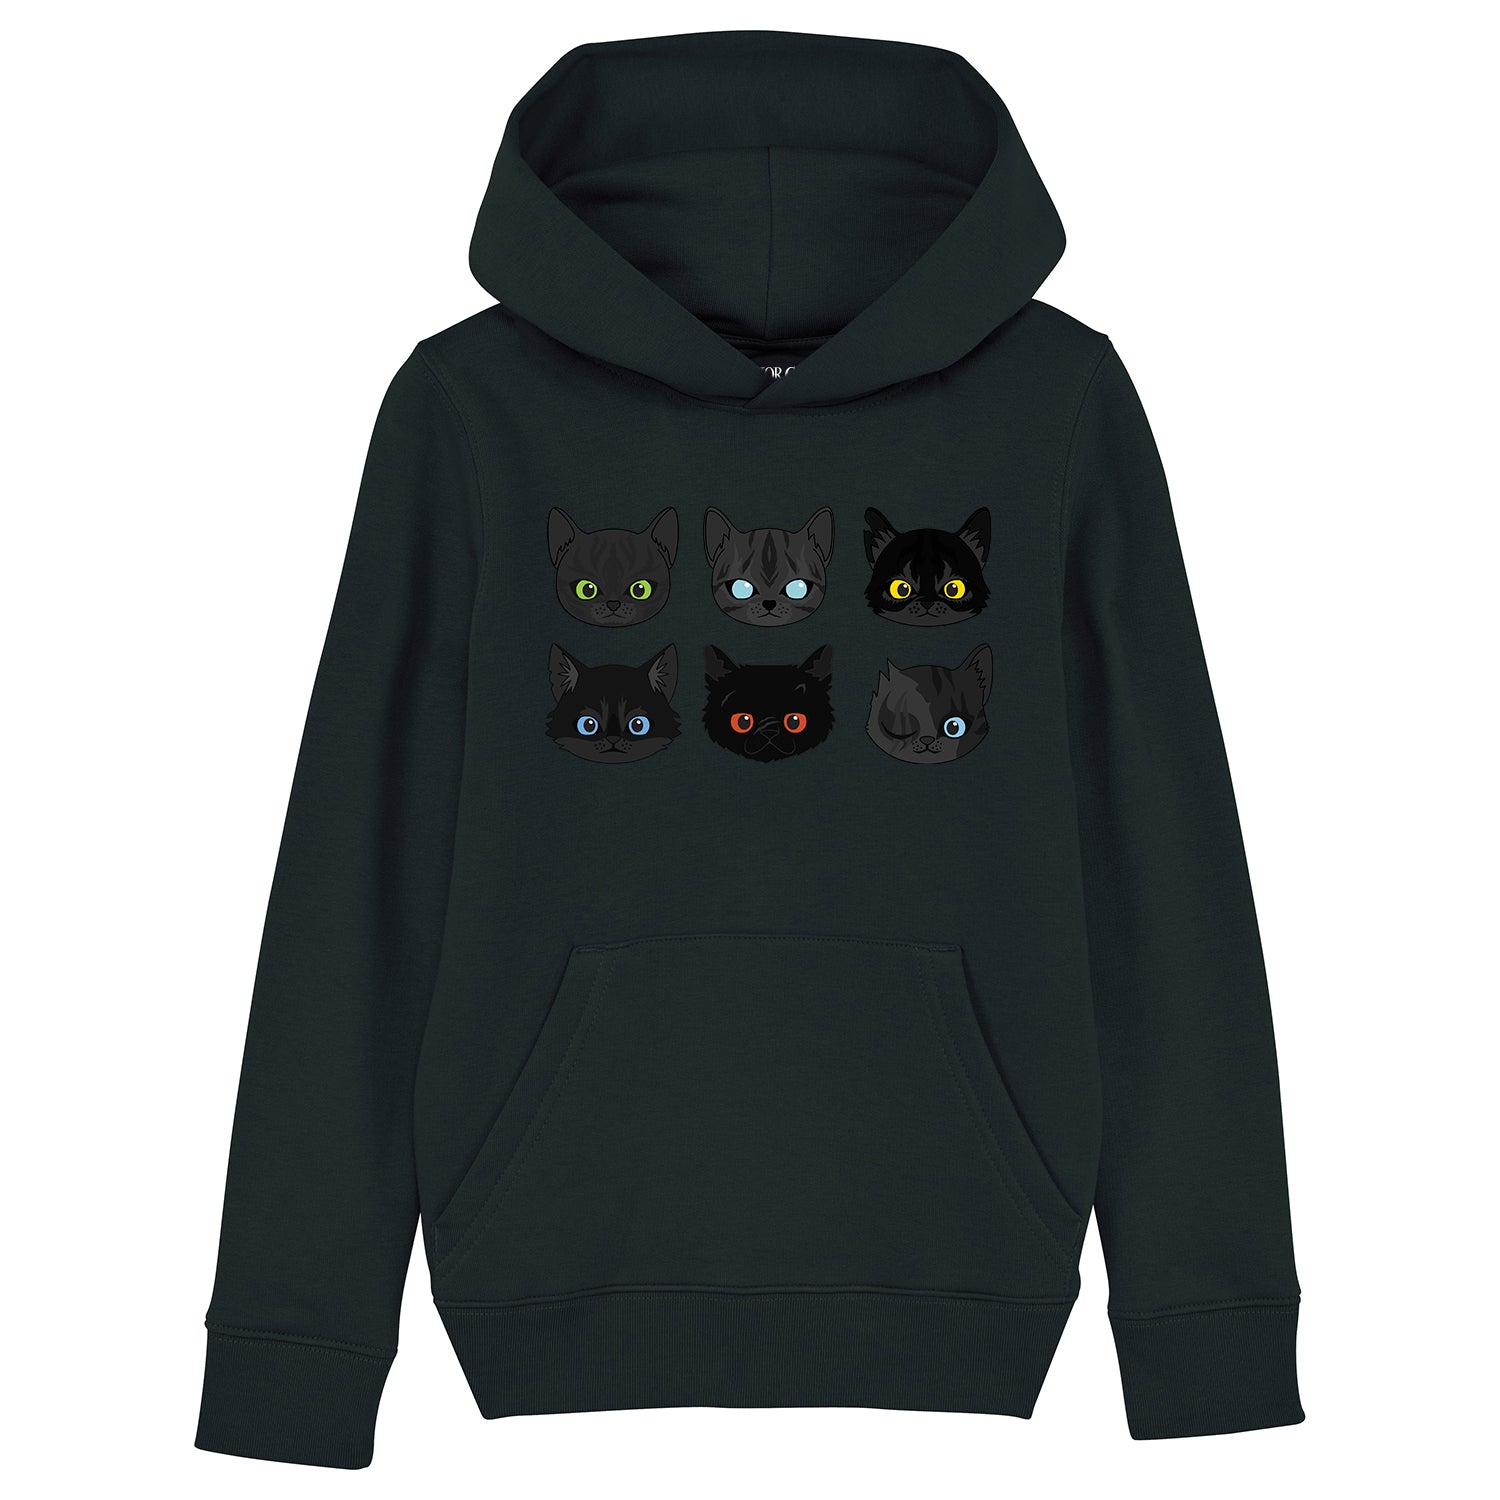 Warrior Cats - Four Cats Hoodie - Adult Unisex